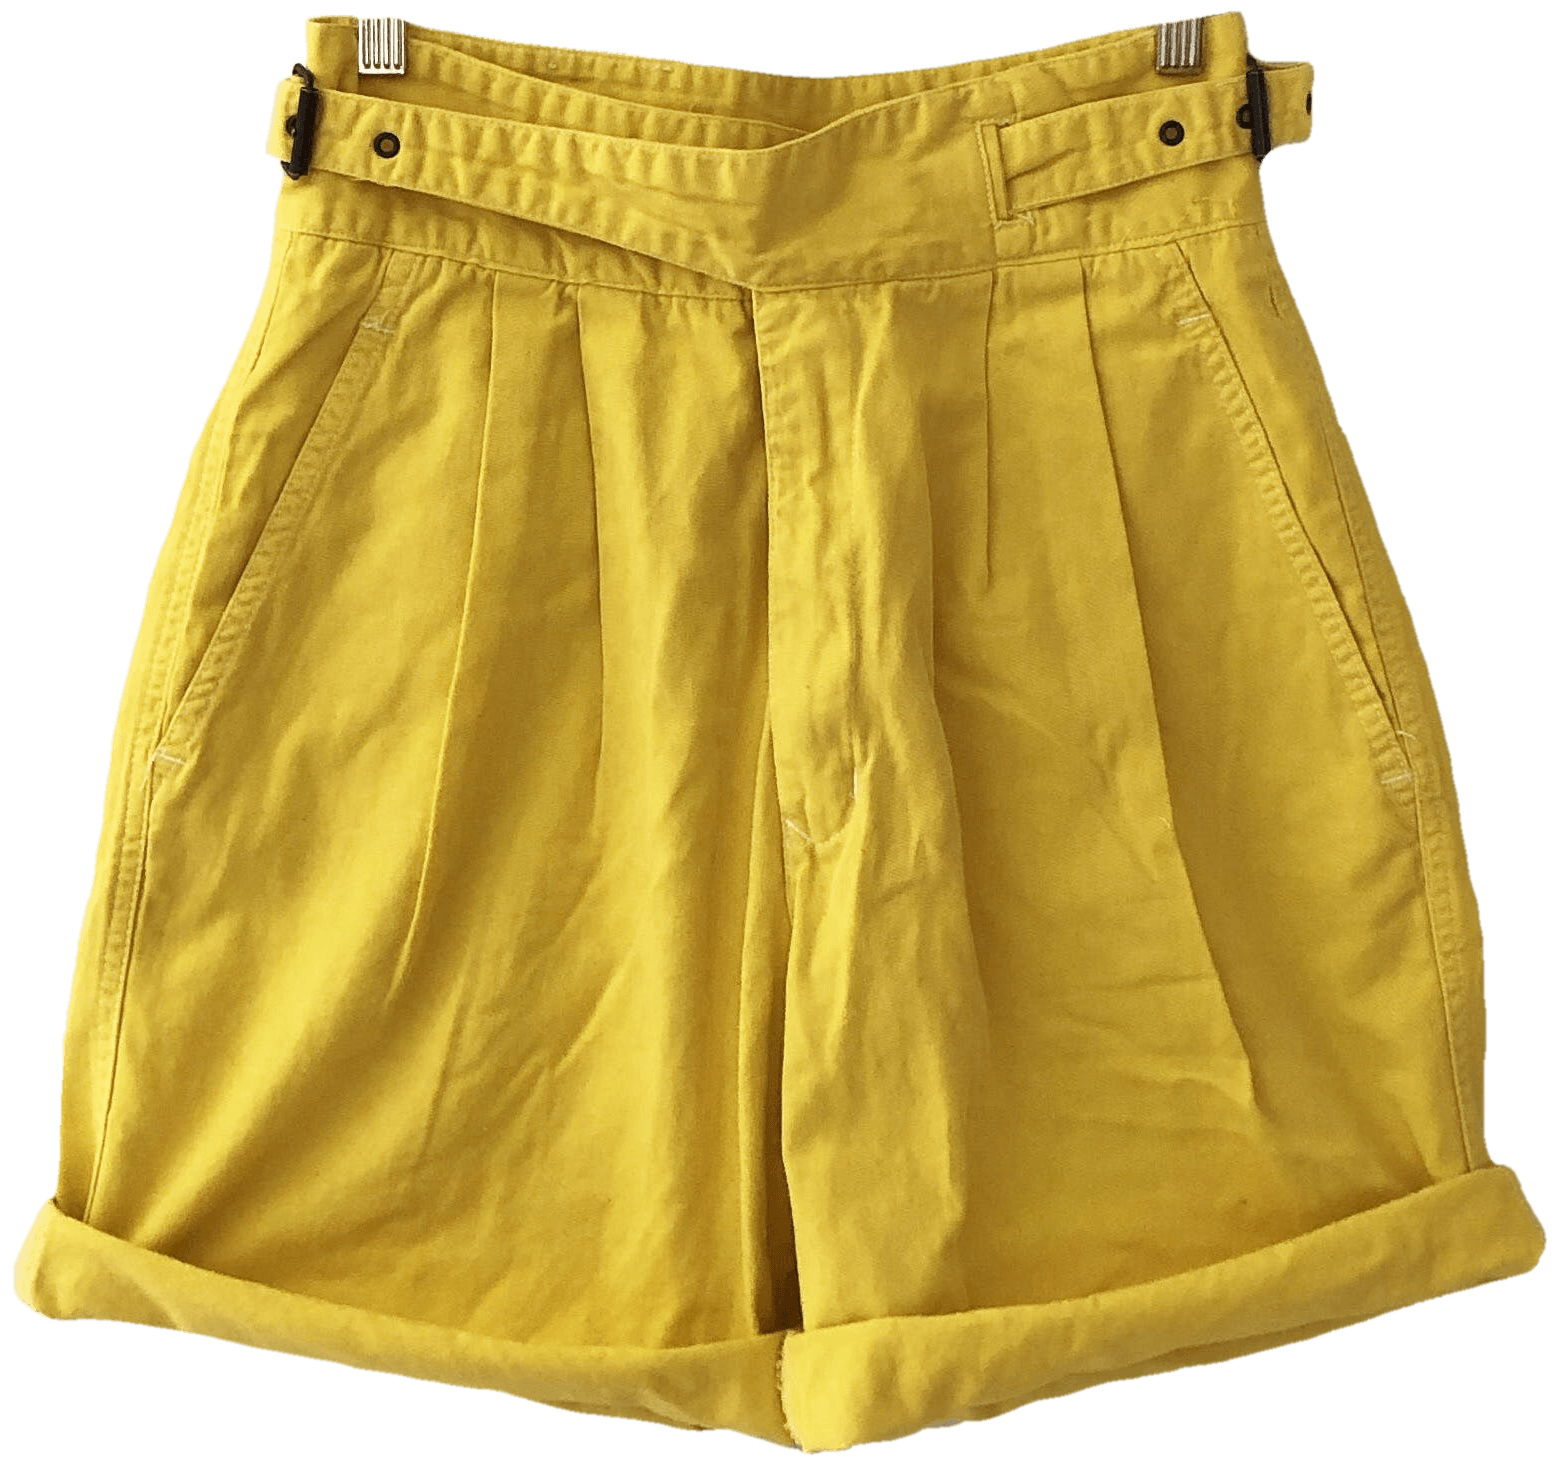 Vintage 80's High Waist Sunny Yellow Pleated Shorts | Shop THRILLING